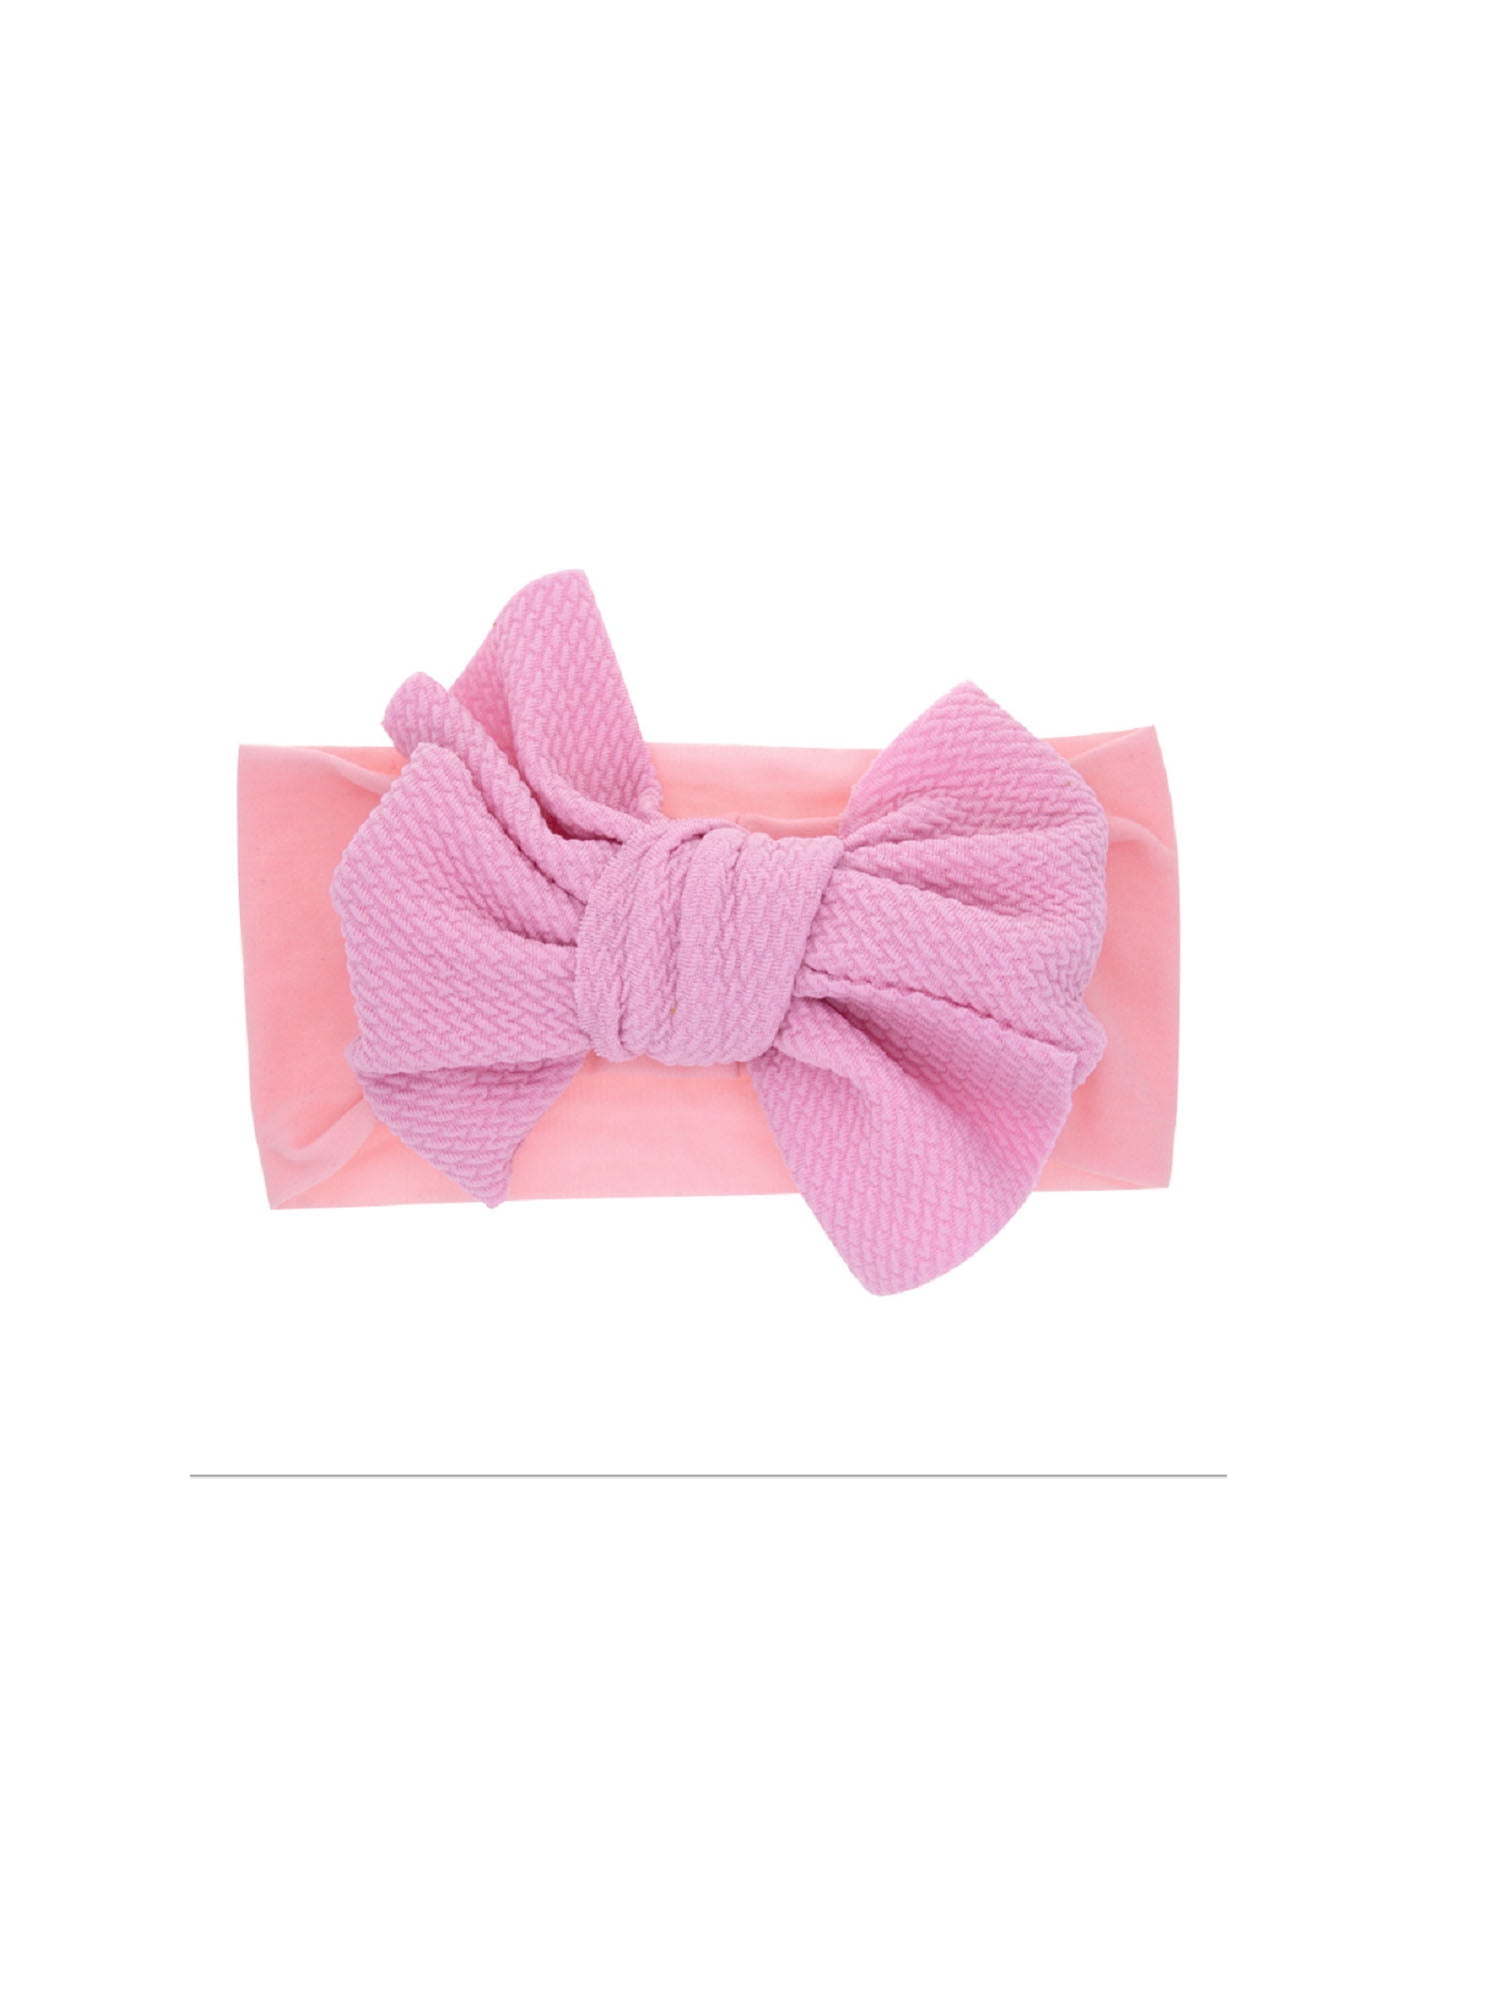 Details about   Baby Toddler Girls Kids Bow Knot Turban Floral Headband Hair Band Headwrap 